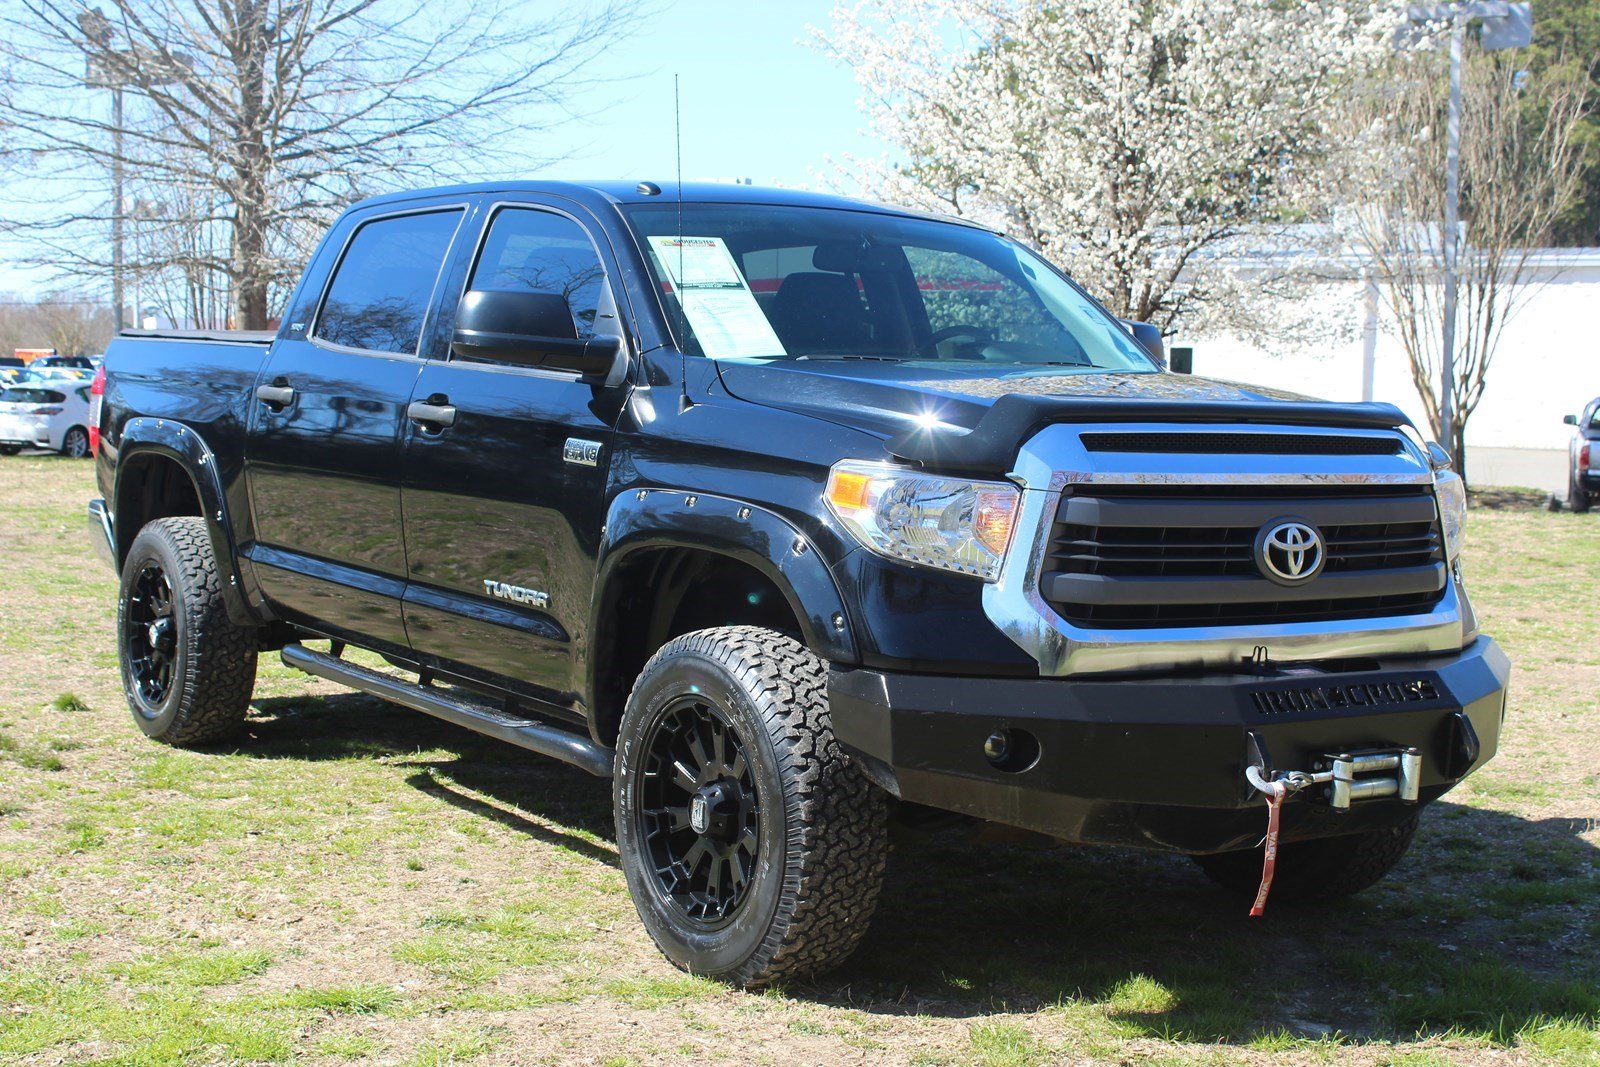 Pre-Owned 2015 Toyota Tundra 4WD Truck SR5 Crew Cab Pickup in